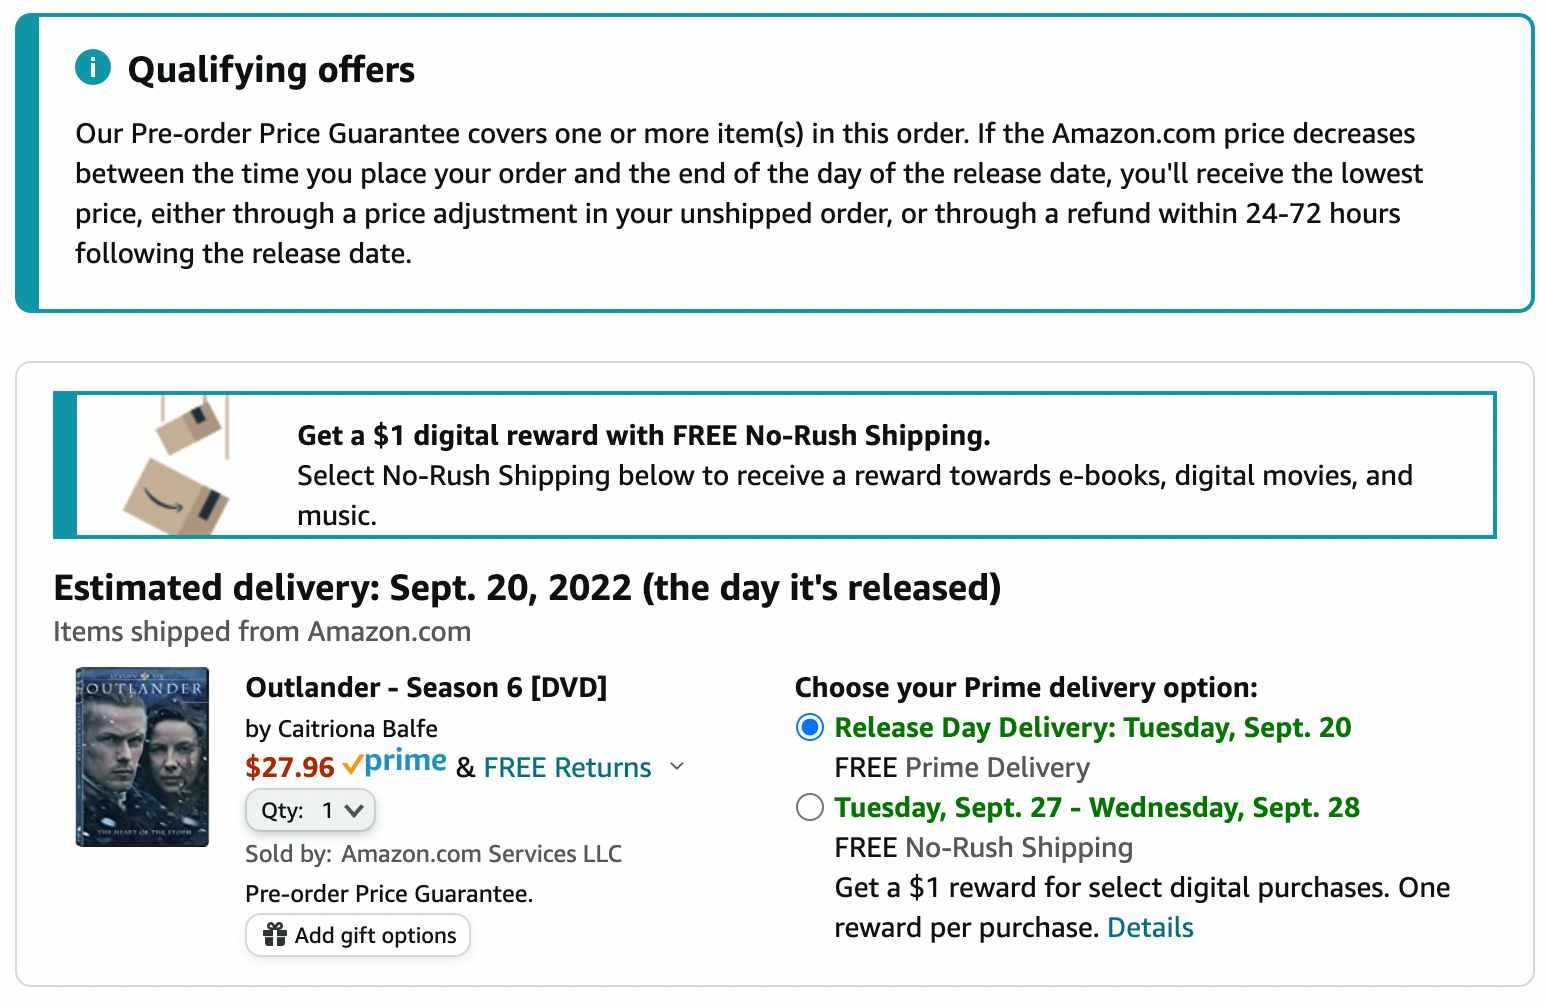 A screenshot of a DVD of Outlander season 6 being preordered on Amazon with a delivery date estimated to be the date of release: September 20, 2022